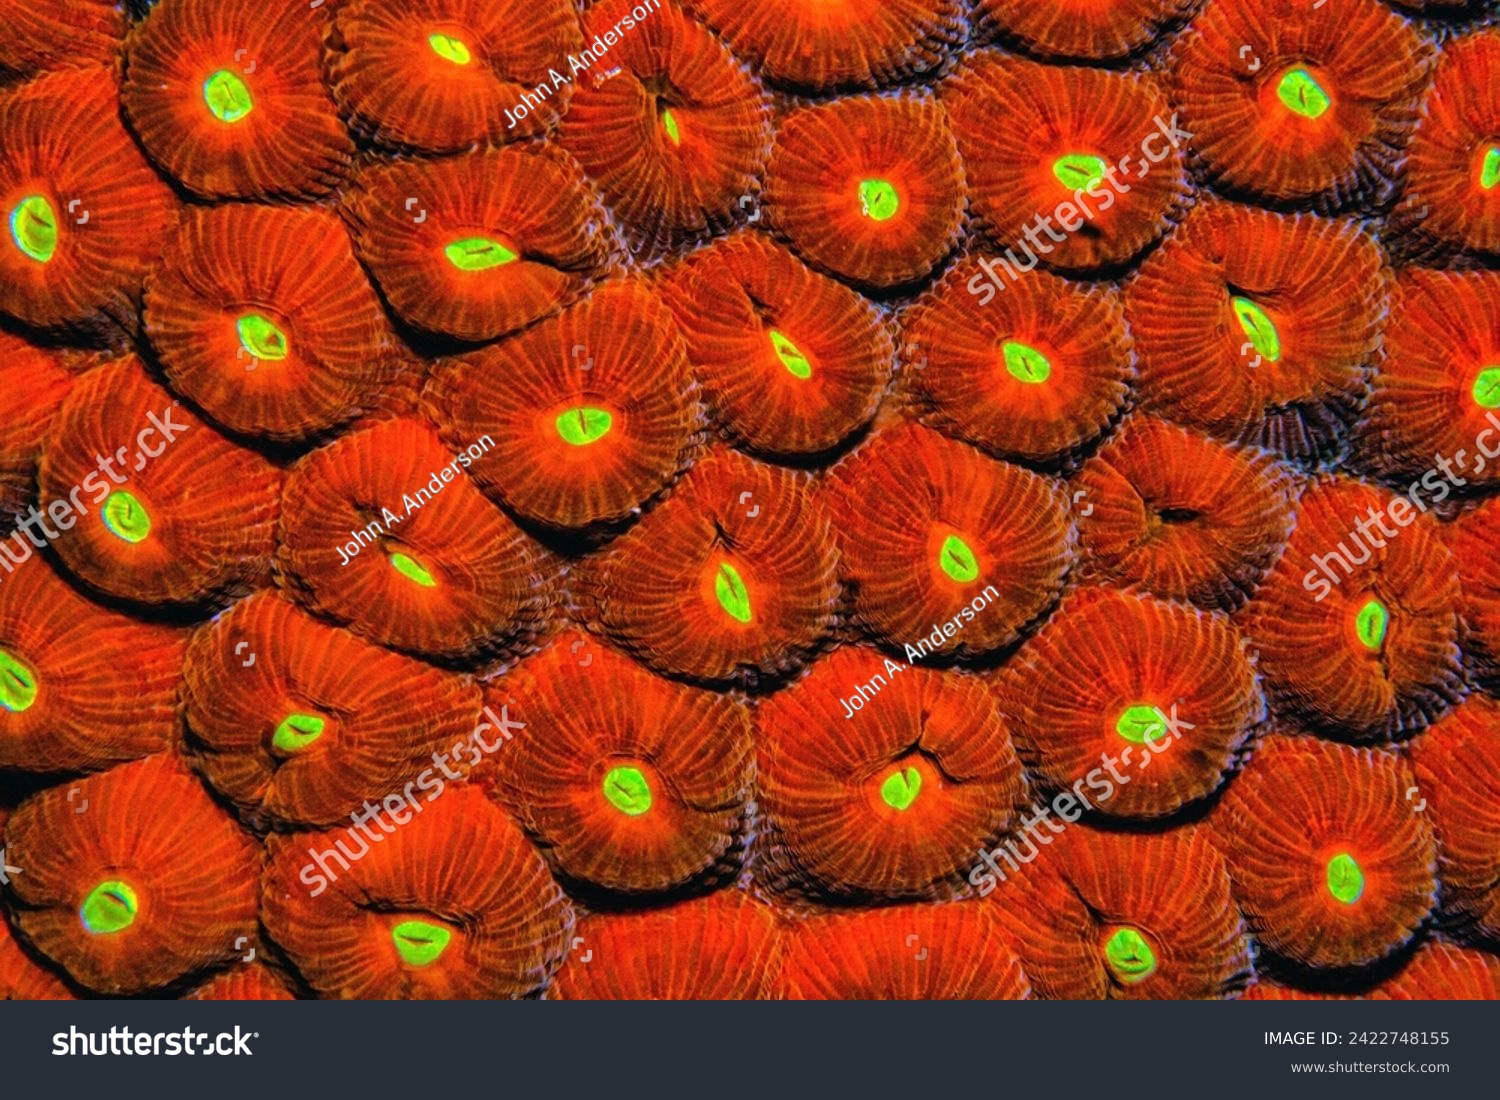 Astreopora is a genus of stony corals in the Acroporidae family. Members of the genus are commonly known as star corals #2422748155